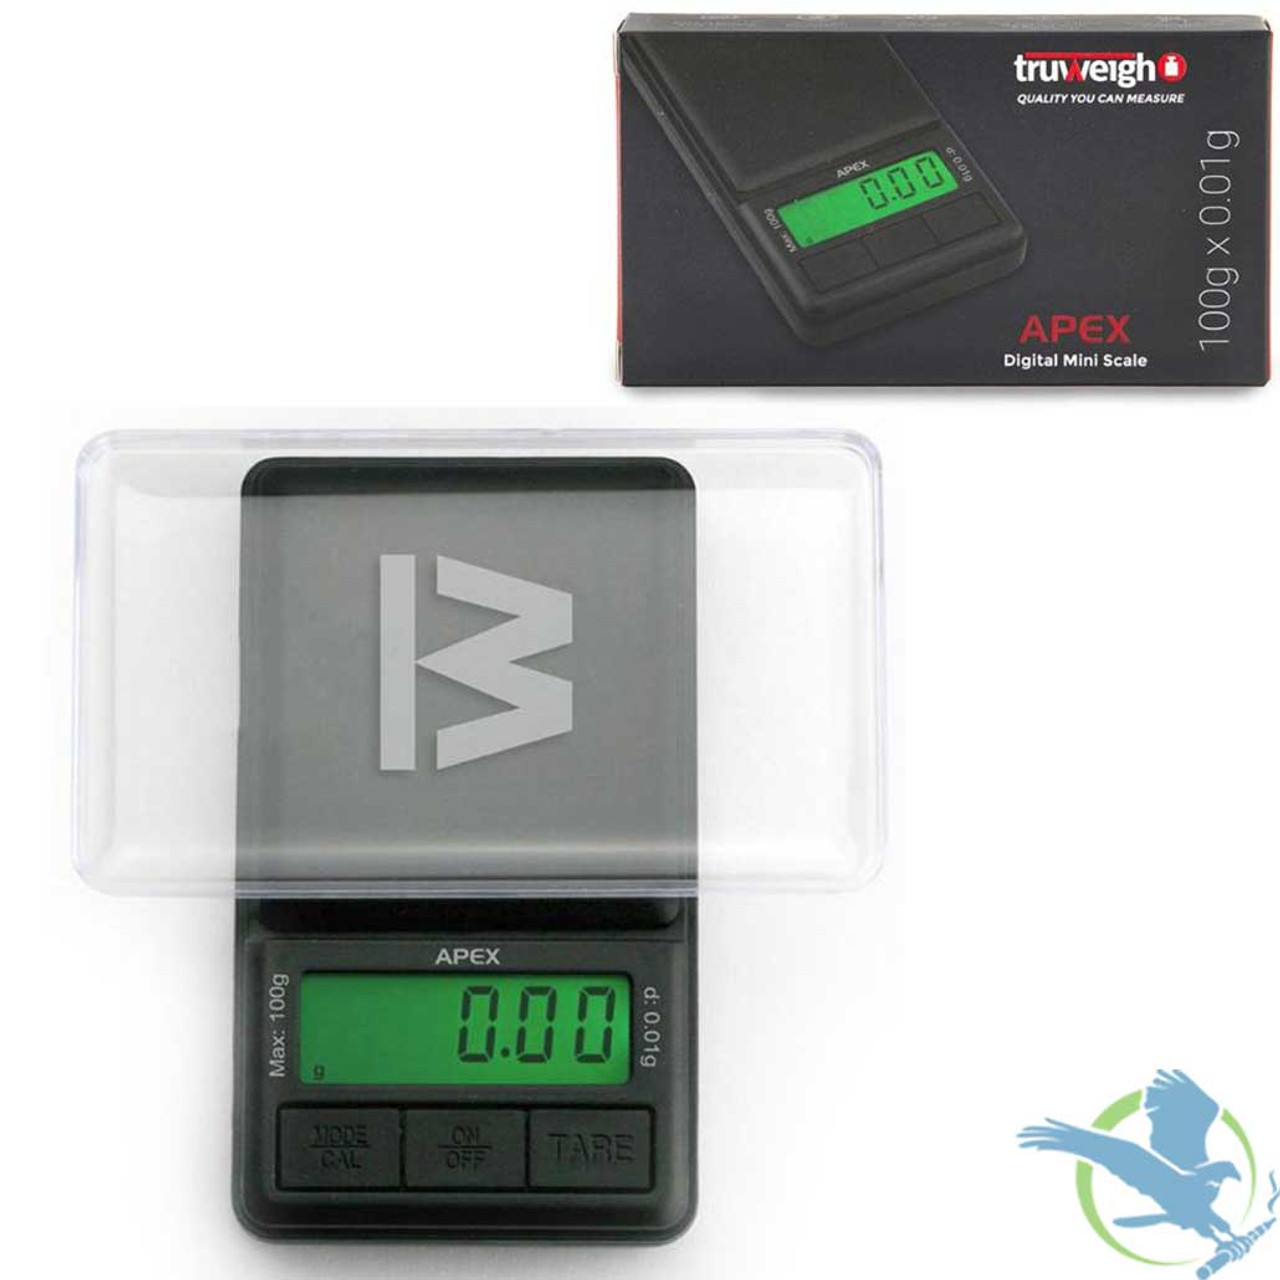 Truweigh Apex Digital Mini Scale 100g X 0 01g Scale Midwest Distribution